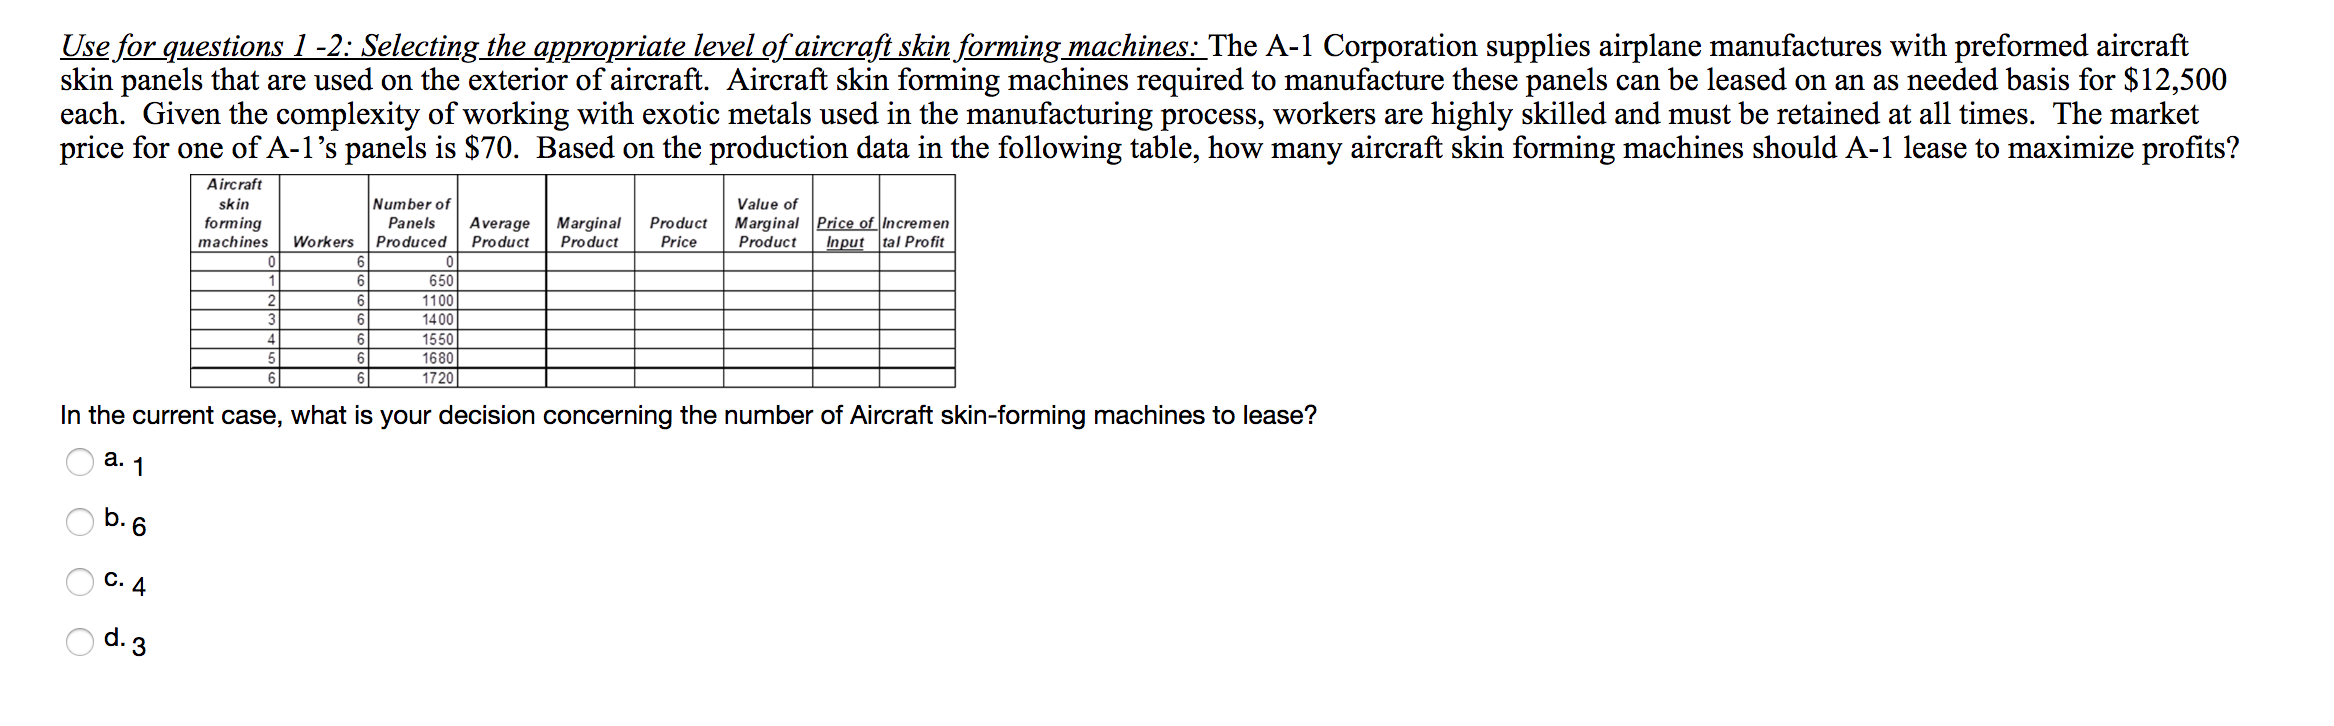 Use for questions 1 -2: Selecting the appropriate level of aircraft skin forming machines: The A-1 Corporation supplies airplane manufactures with preformed aircraft
skin panels that are used on the exterior of aircraft. Aircraft skin forming machines required to manufacture these panels can be leased on an as needed basis for $12,500
each. Given the complexity of working with exotic metals used in the manufacturing process, workers are
price for one of A-1's panels is $70. Based on the production data in the following table, how many aircraft skin forming machines should A-1 lease to maximize profits?
highly skilled and must be retained at all times. The market
Aircraft
Number of
Value of
skin
Marginal Price of Incremen
Input tal Pro fit
Product
forming
machines
Panels
Average
Product
Marginal
Product
Workers
Produced
Price
Product
0
0
650
1
6
1100
3
6
1400
1550
6
4
5
6
1680
6
6
1720
In the current case, what is your decision concerning the number of Aircraft skin-forming machines to lease?
а.
1
b.6
C. 4
d. 3
OOOC
